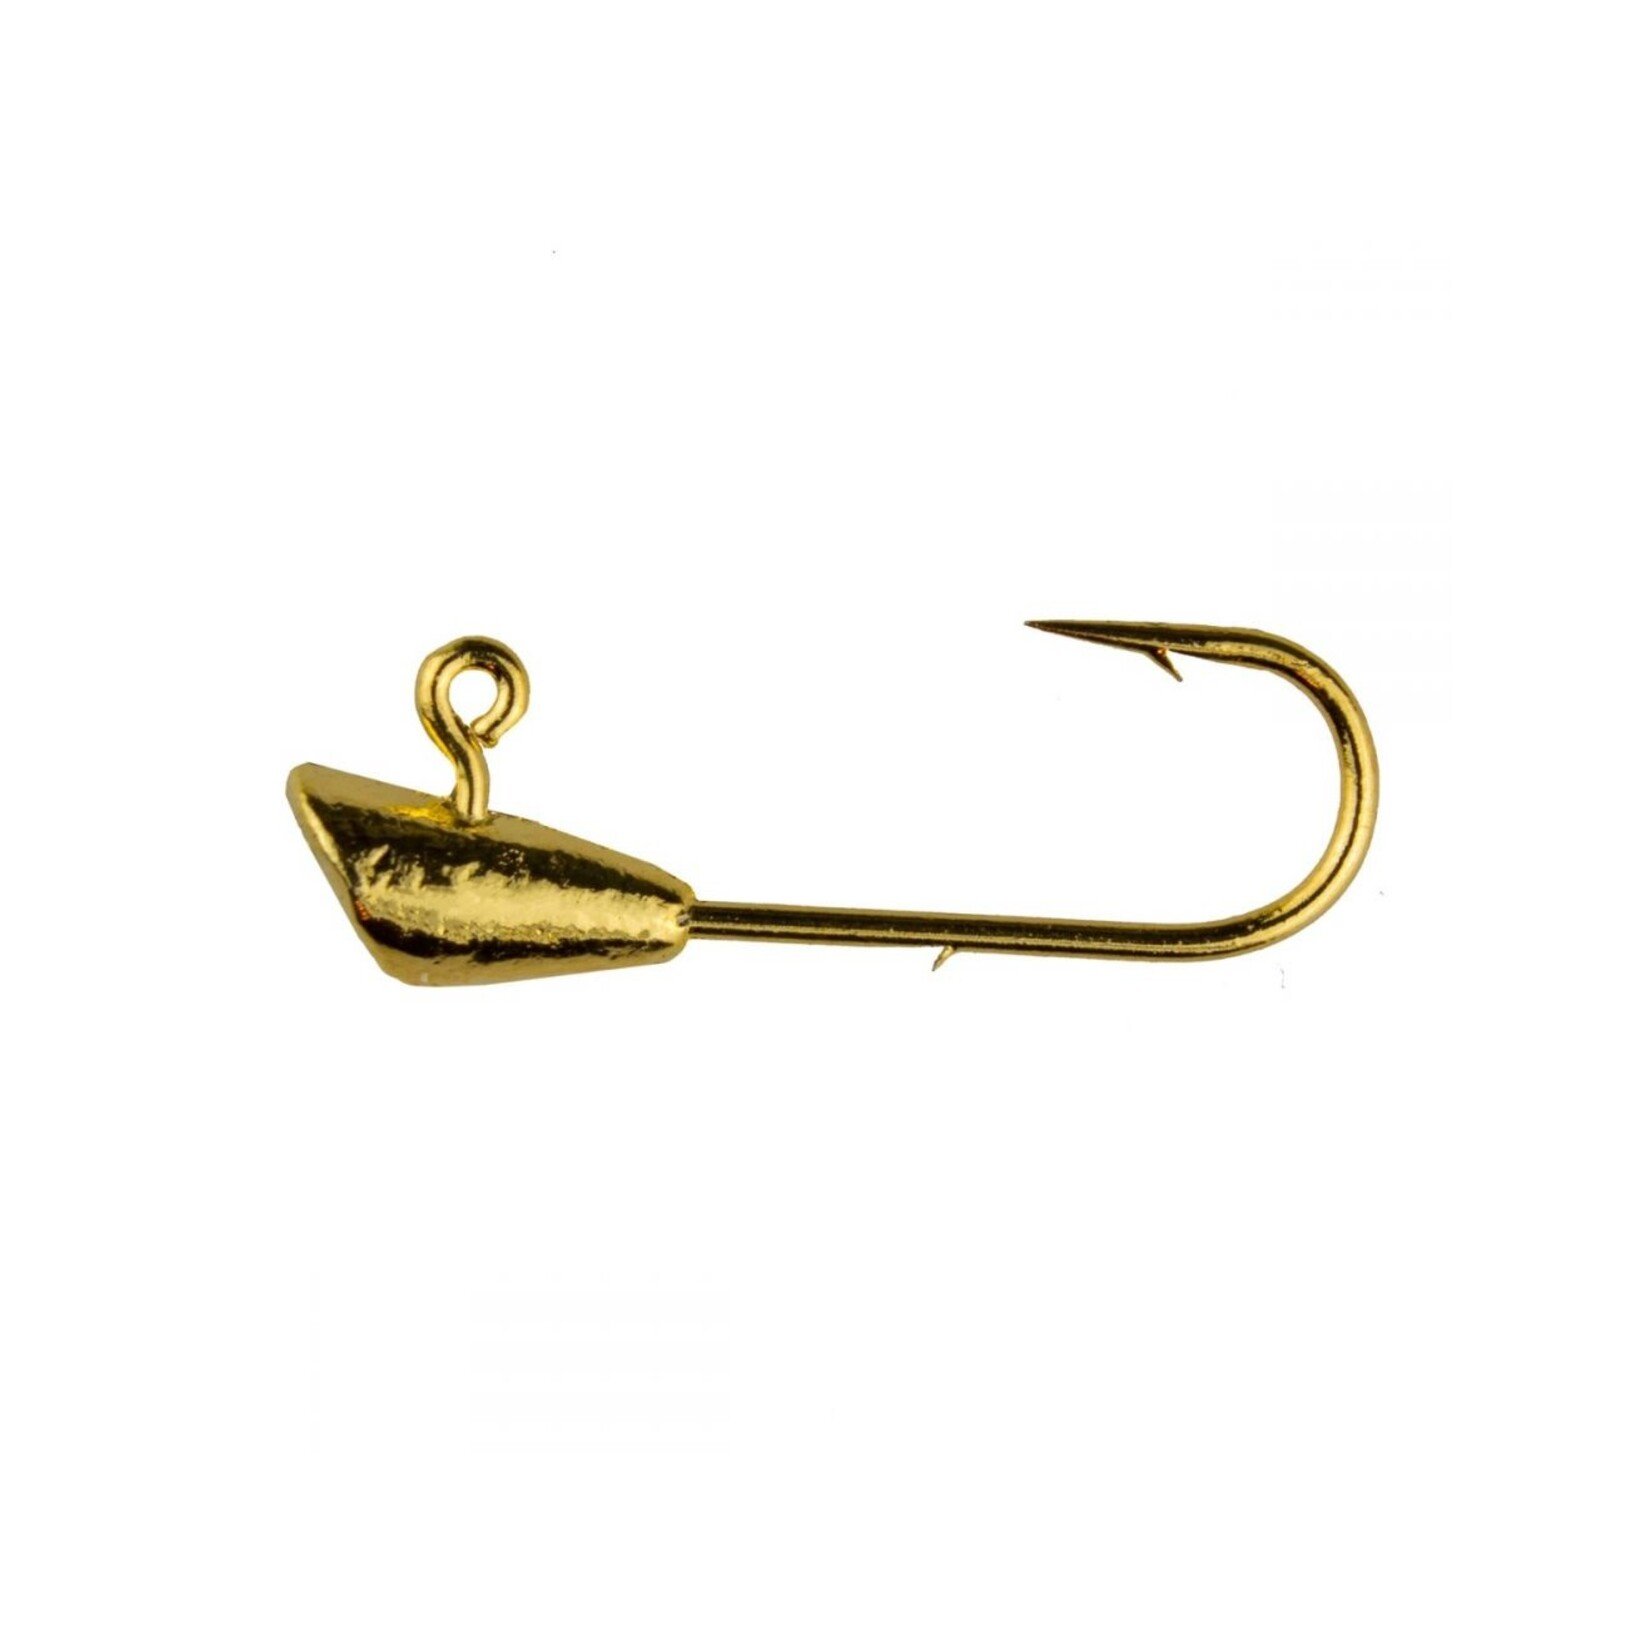 Leland's Lures TROUT MAGNET JIG HEADS